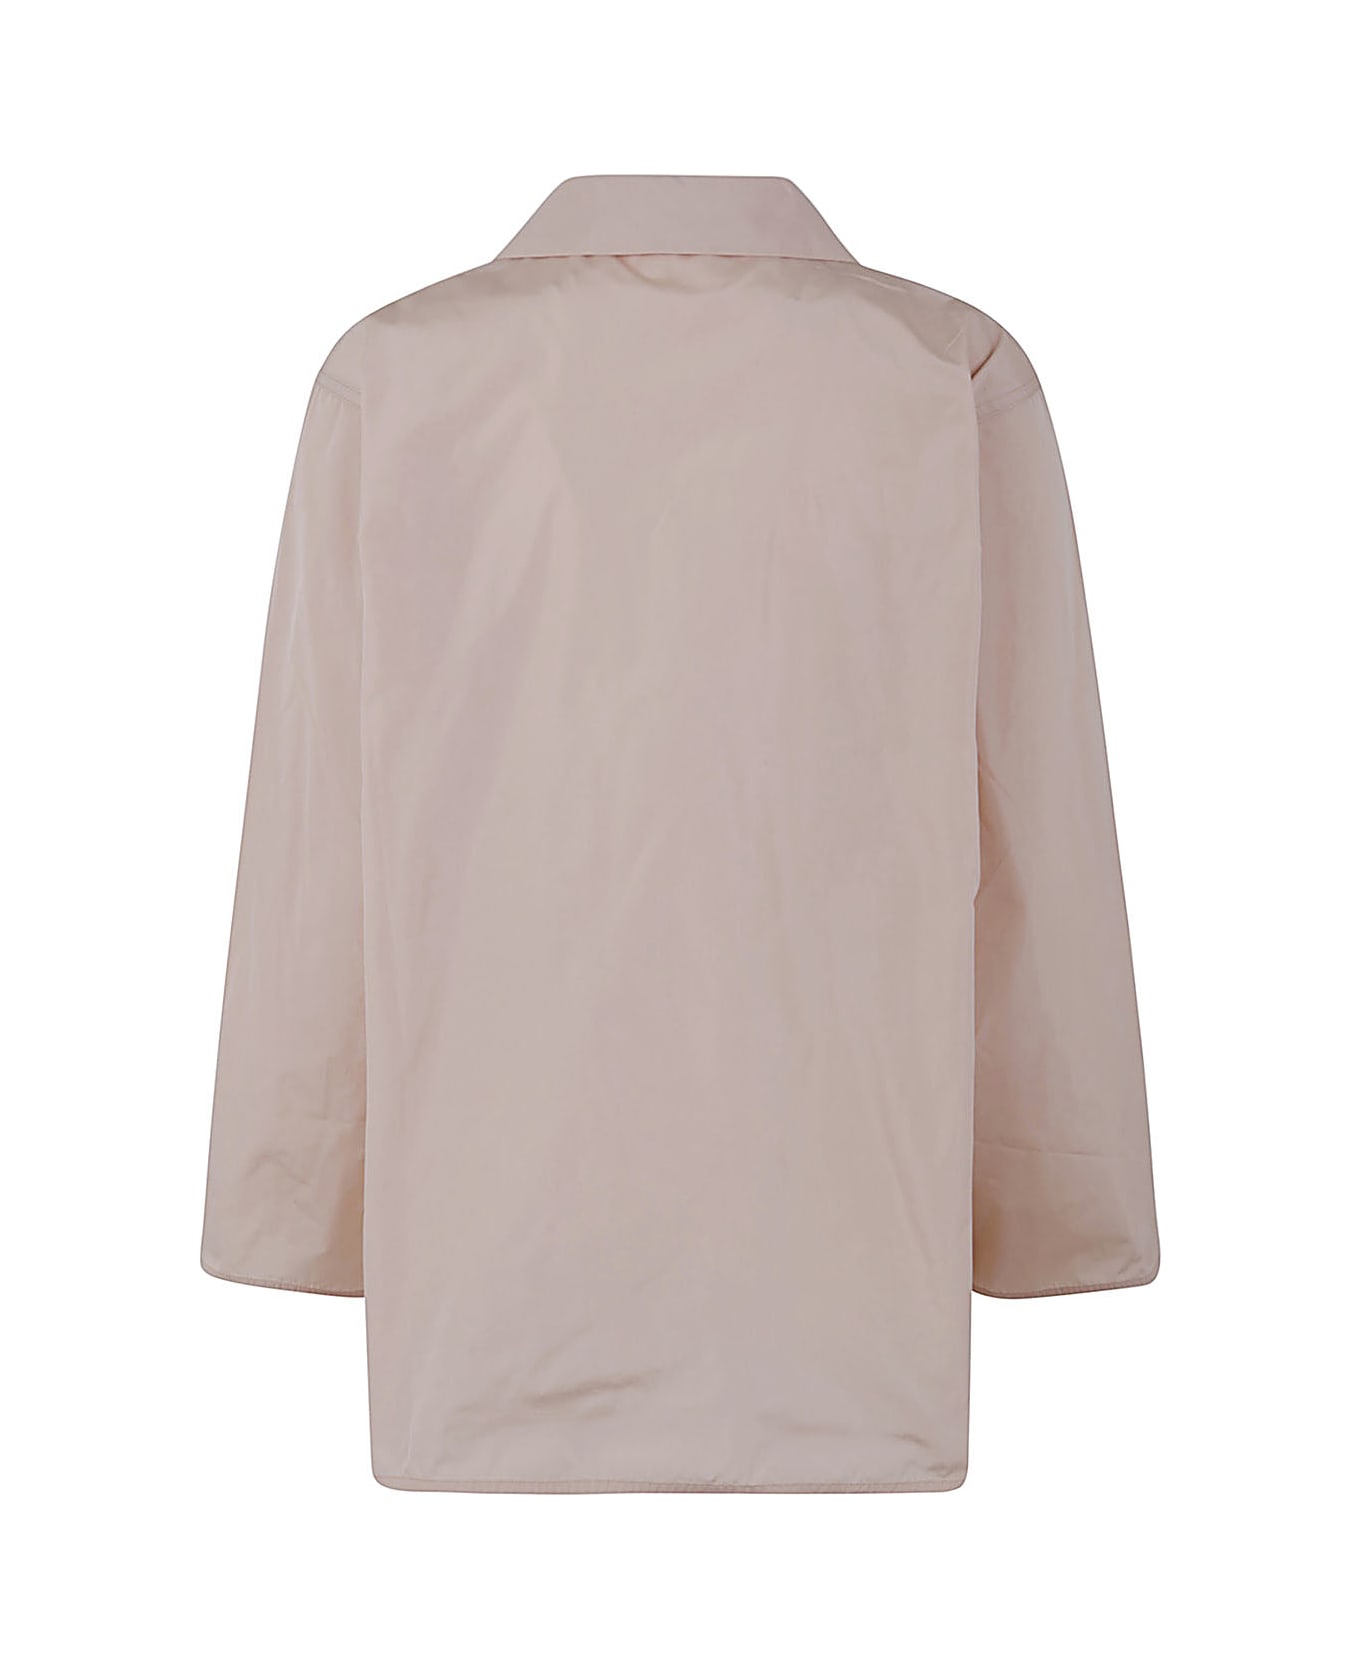 Sofie d'Hoore Long Sleeve Shirt With Front Applied Pocket - Nude シャツ